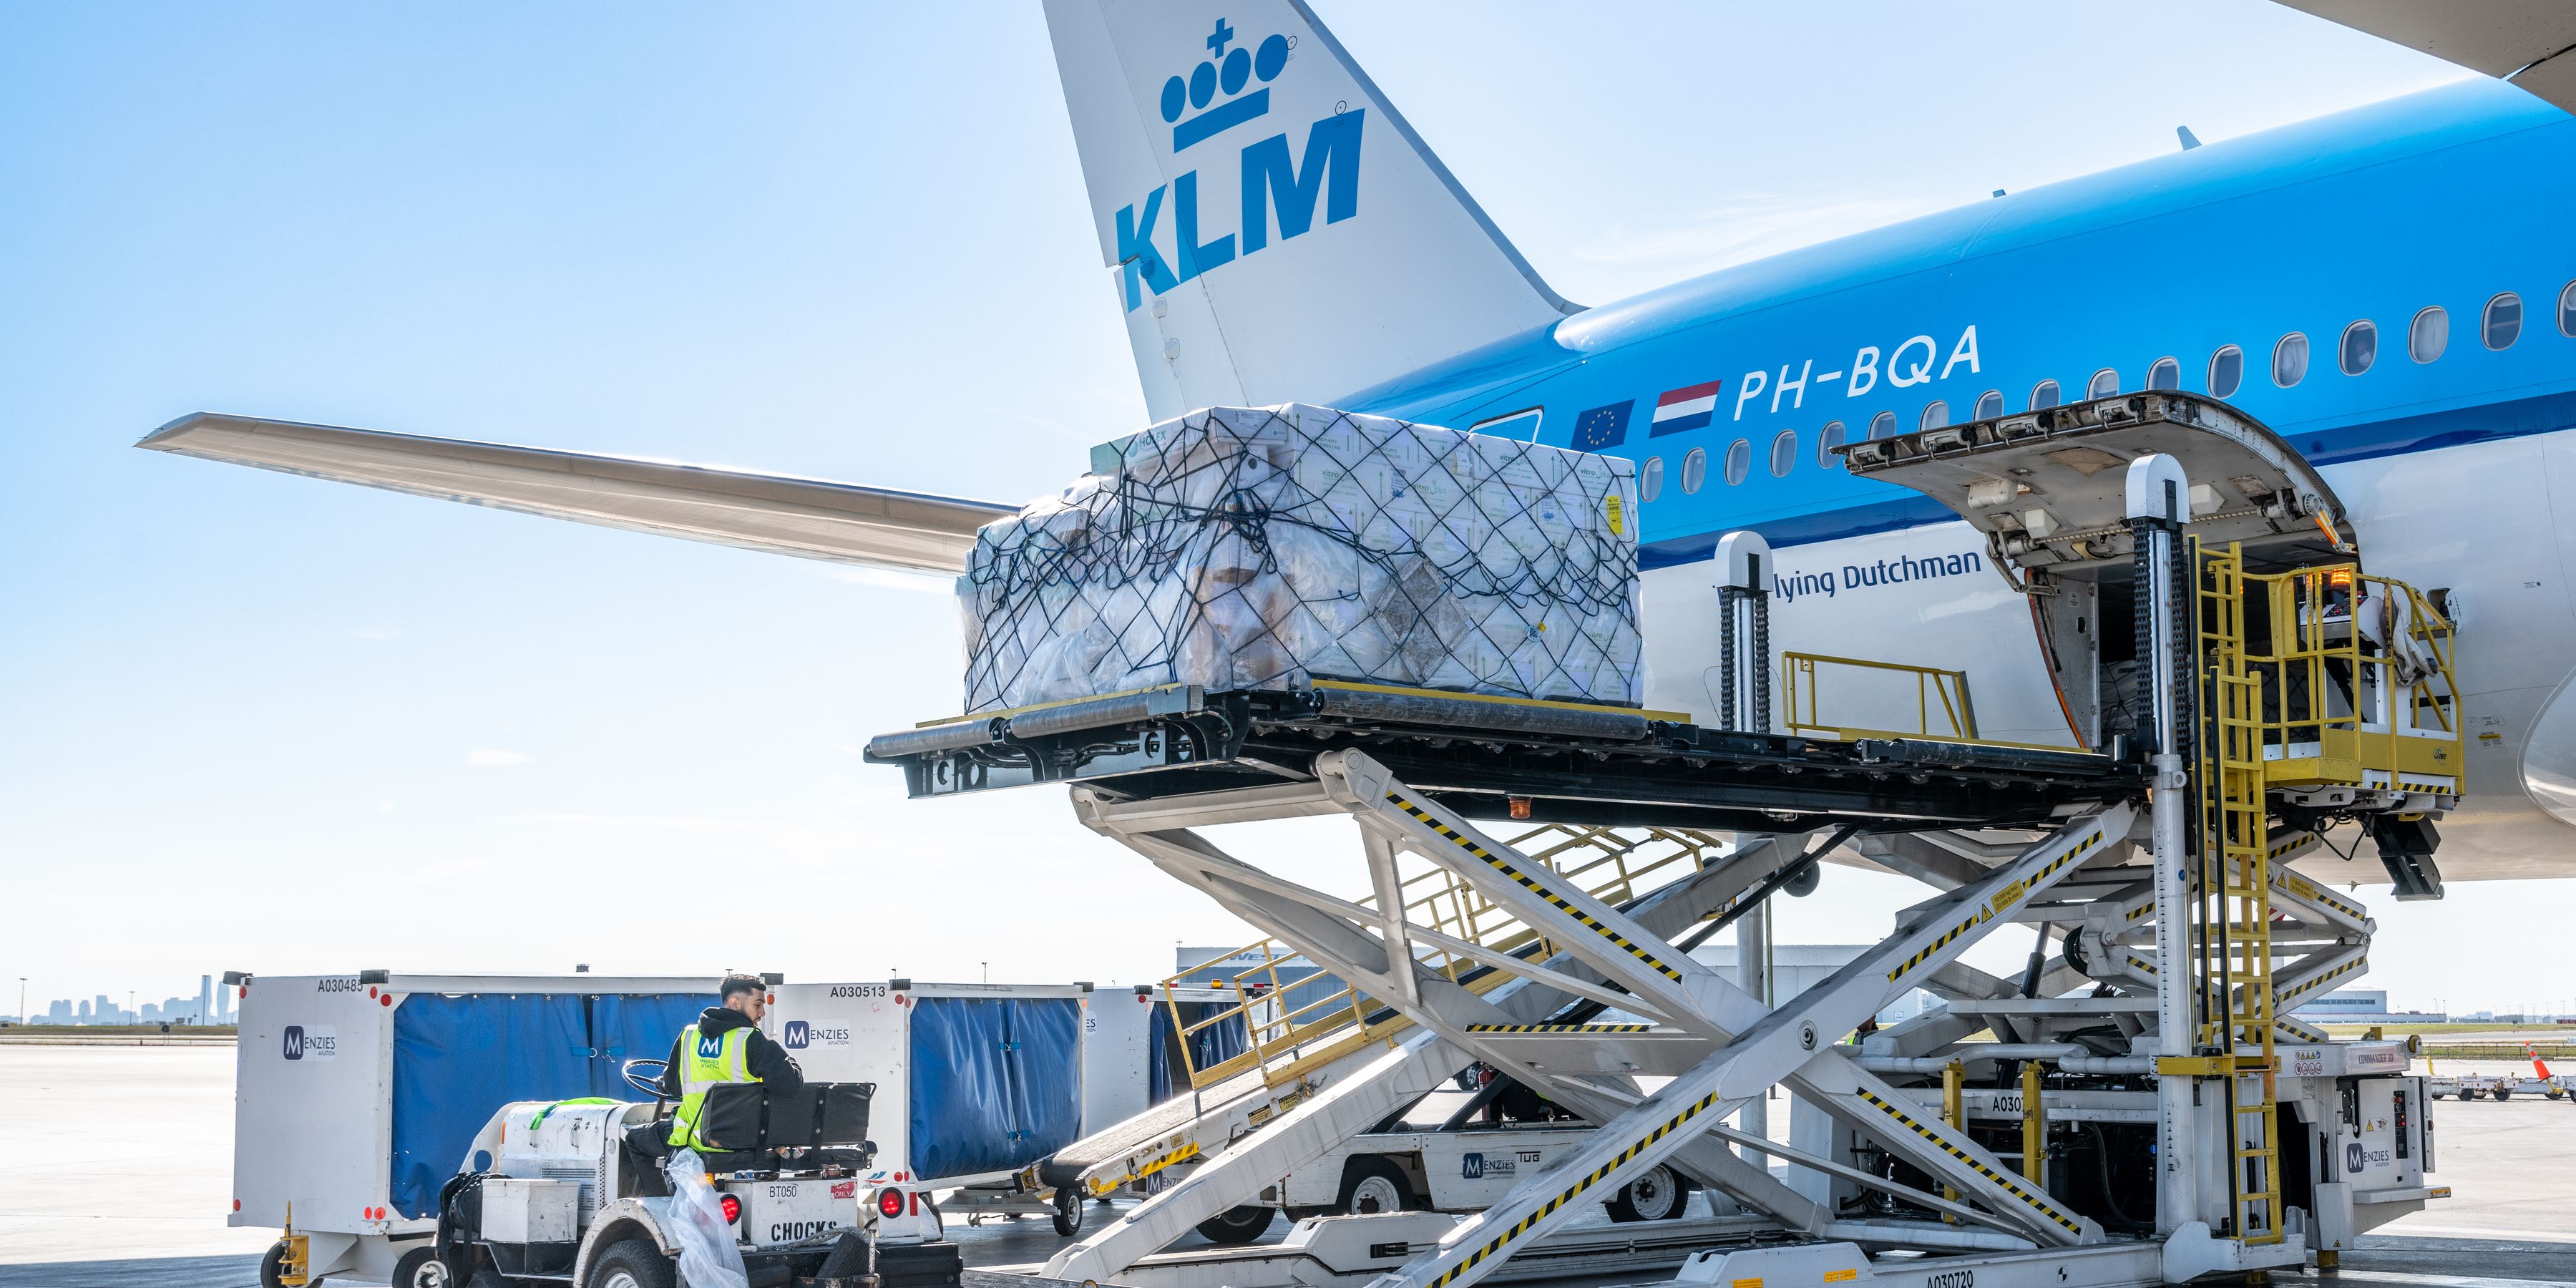 Cargo loaded on aircraft